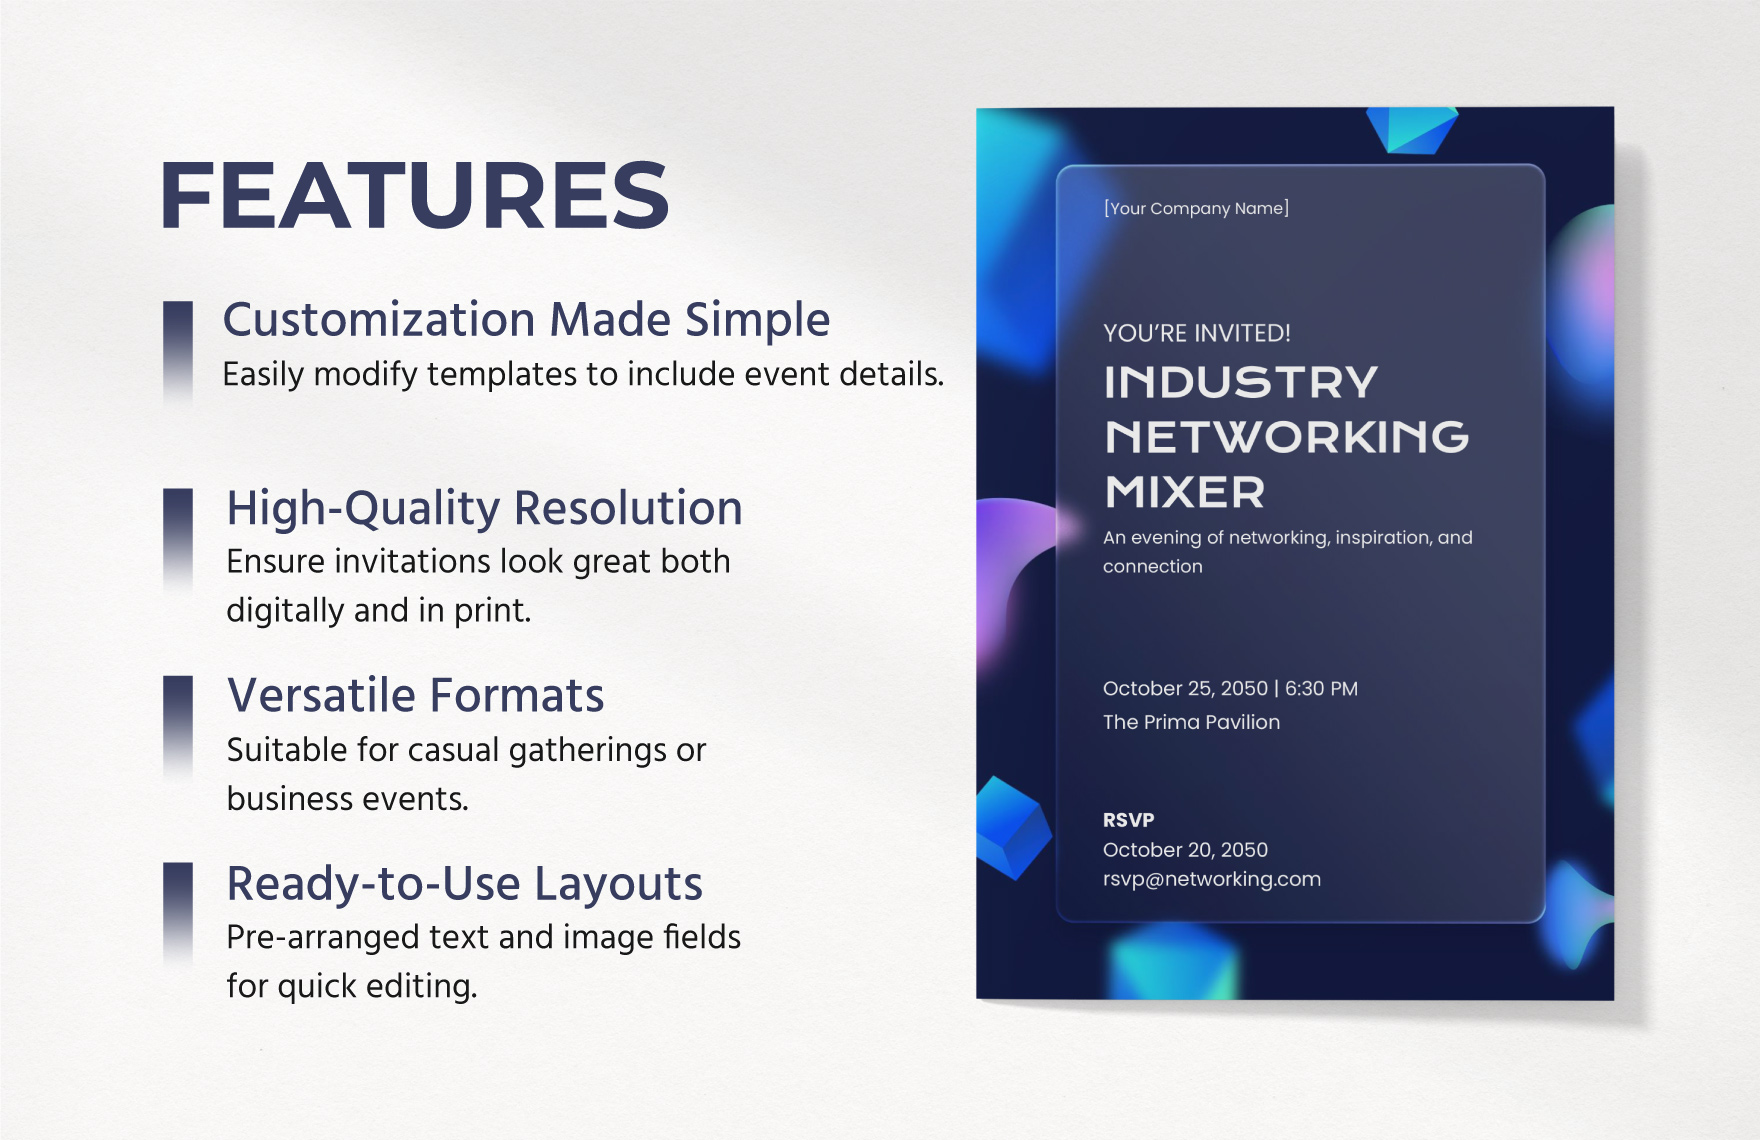 Industry Networking Mixer Invitation Card Template